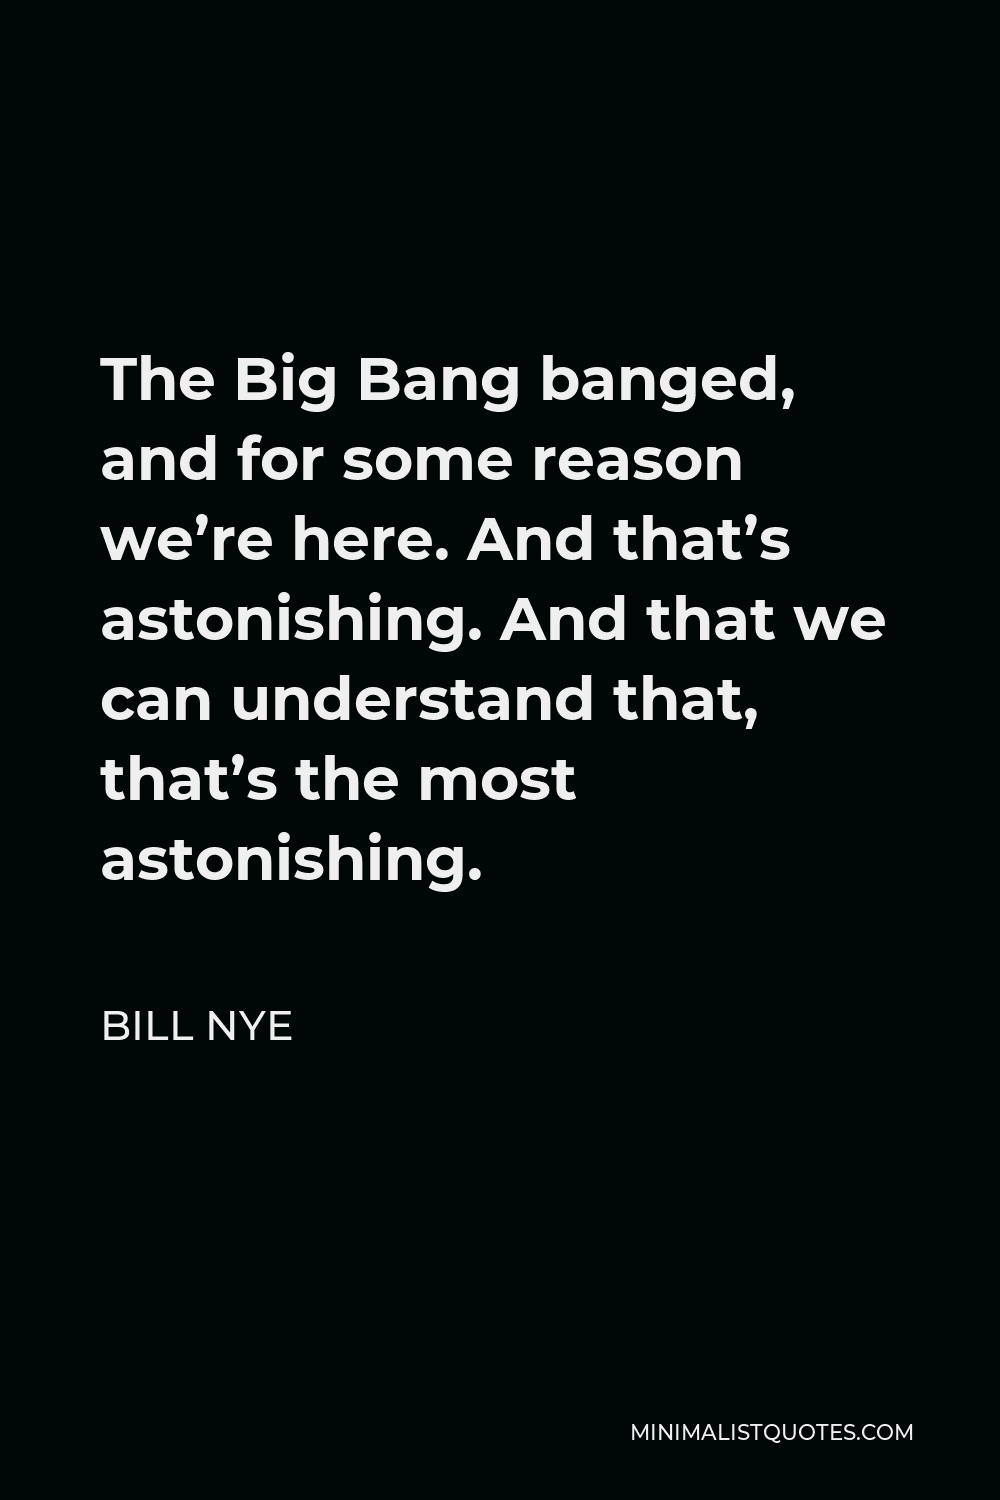 Bill Nye Quote - The Big Bang banged, and for some reason we’re here. And that’s astonishing. And that we can understand that, that’s the most astonishing.